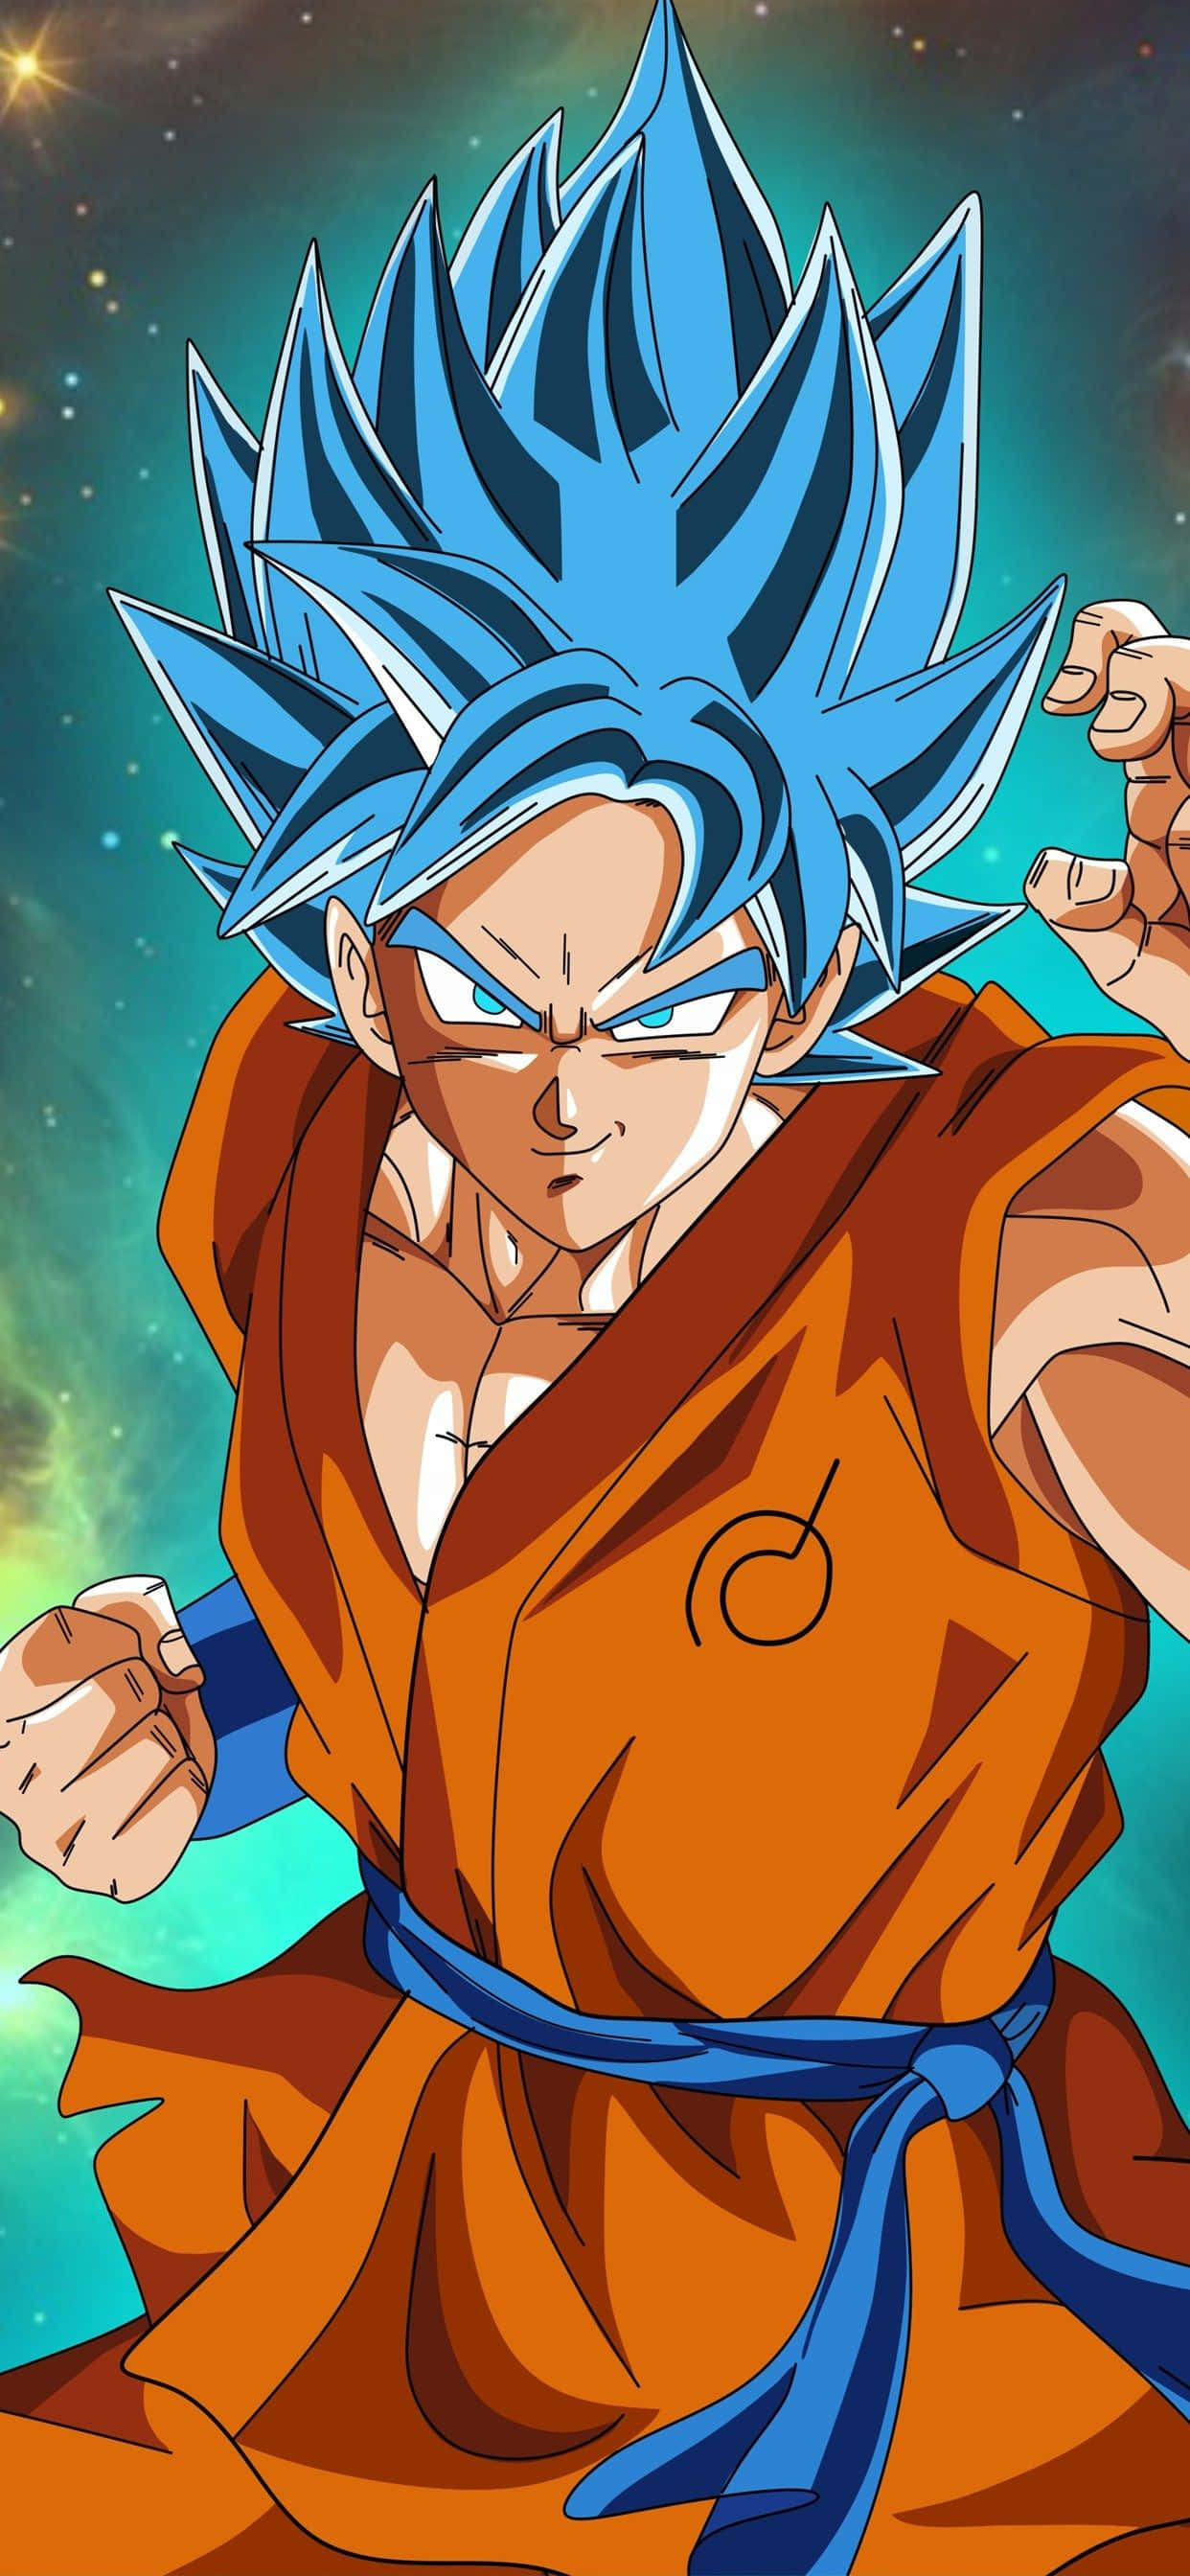 Unlock The Power Of The Dragon Ball With The Iphone Wallpaper